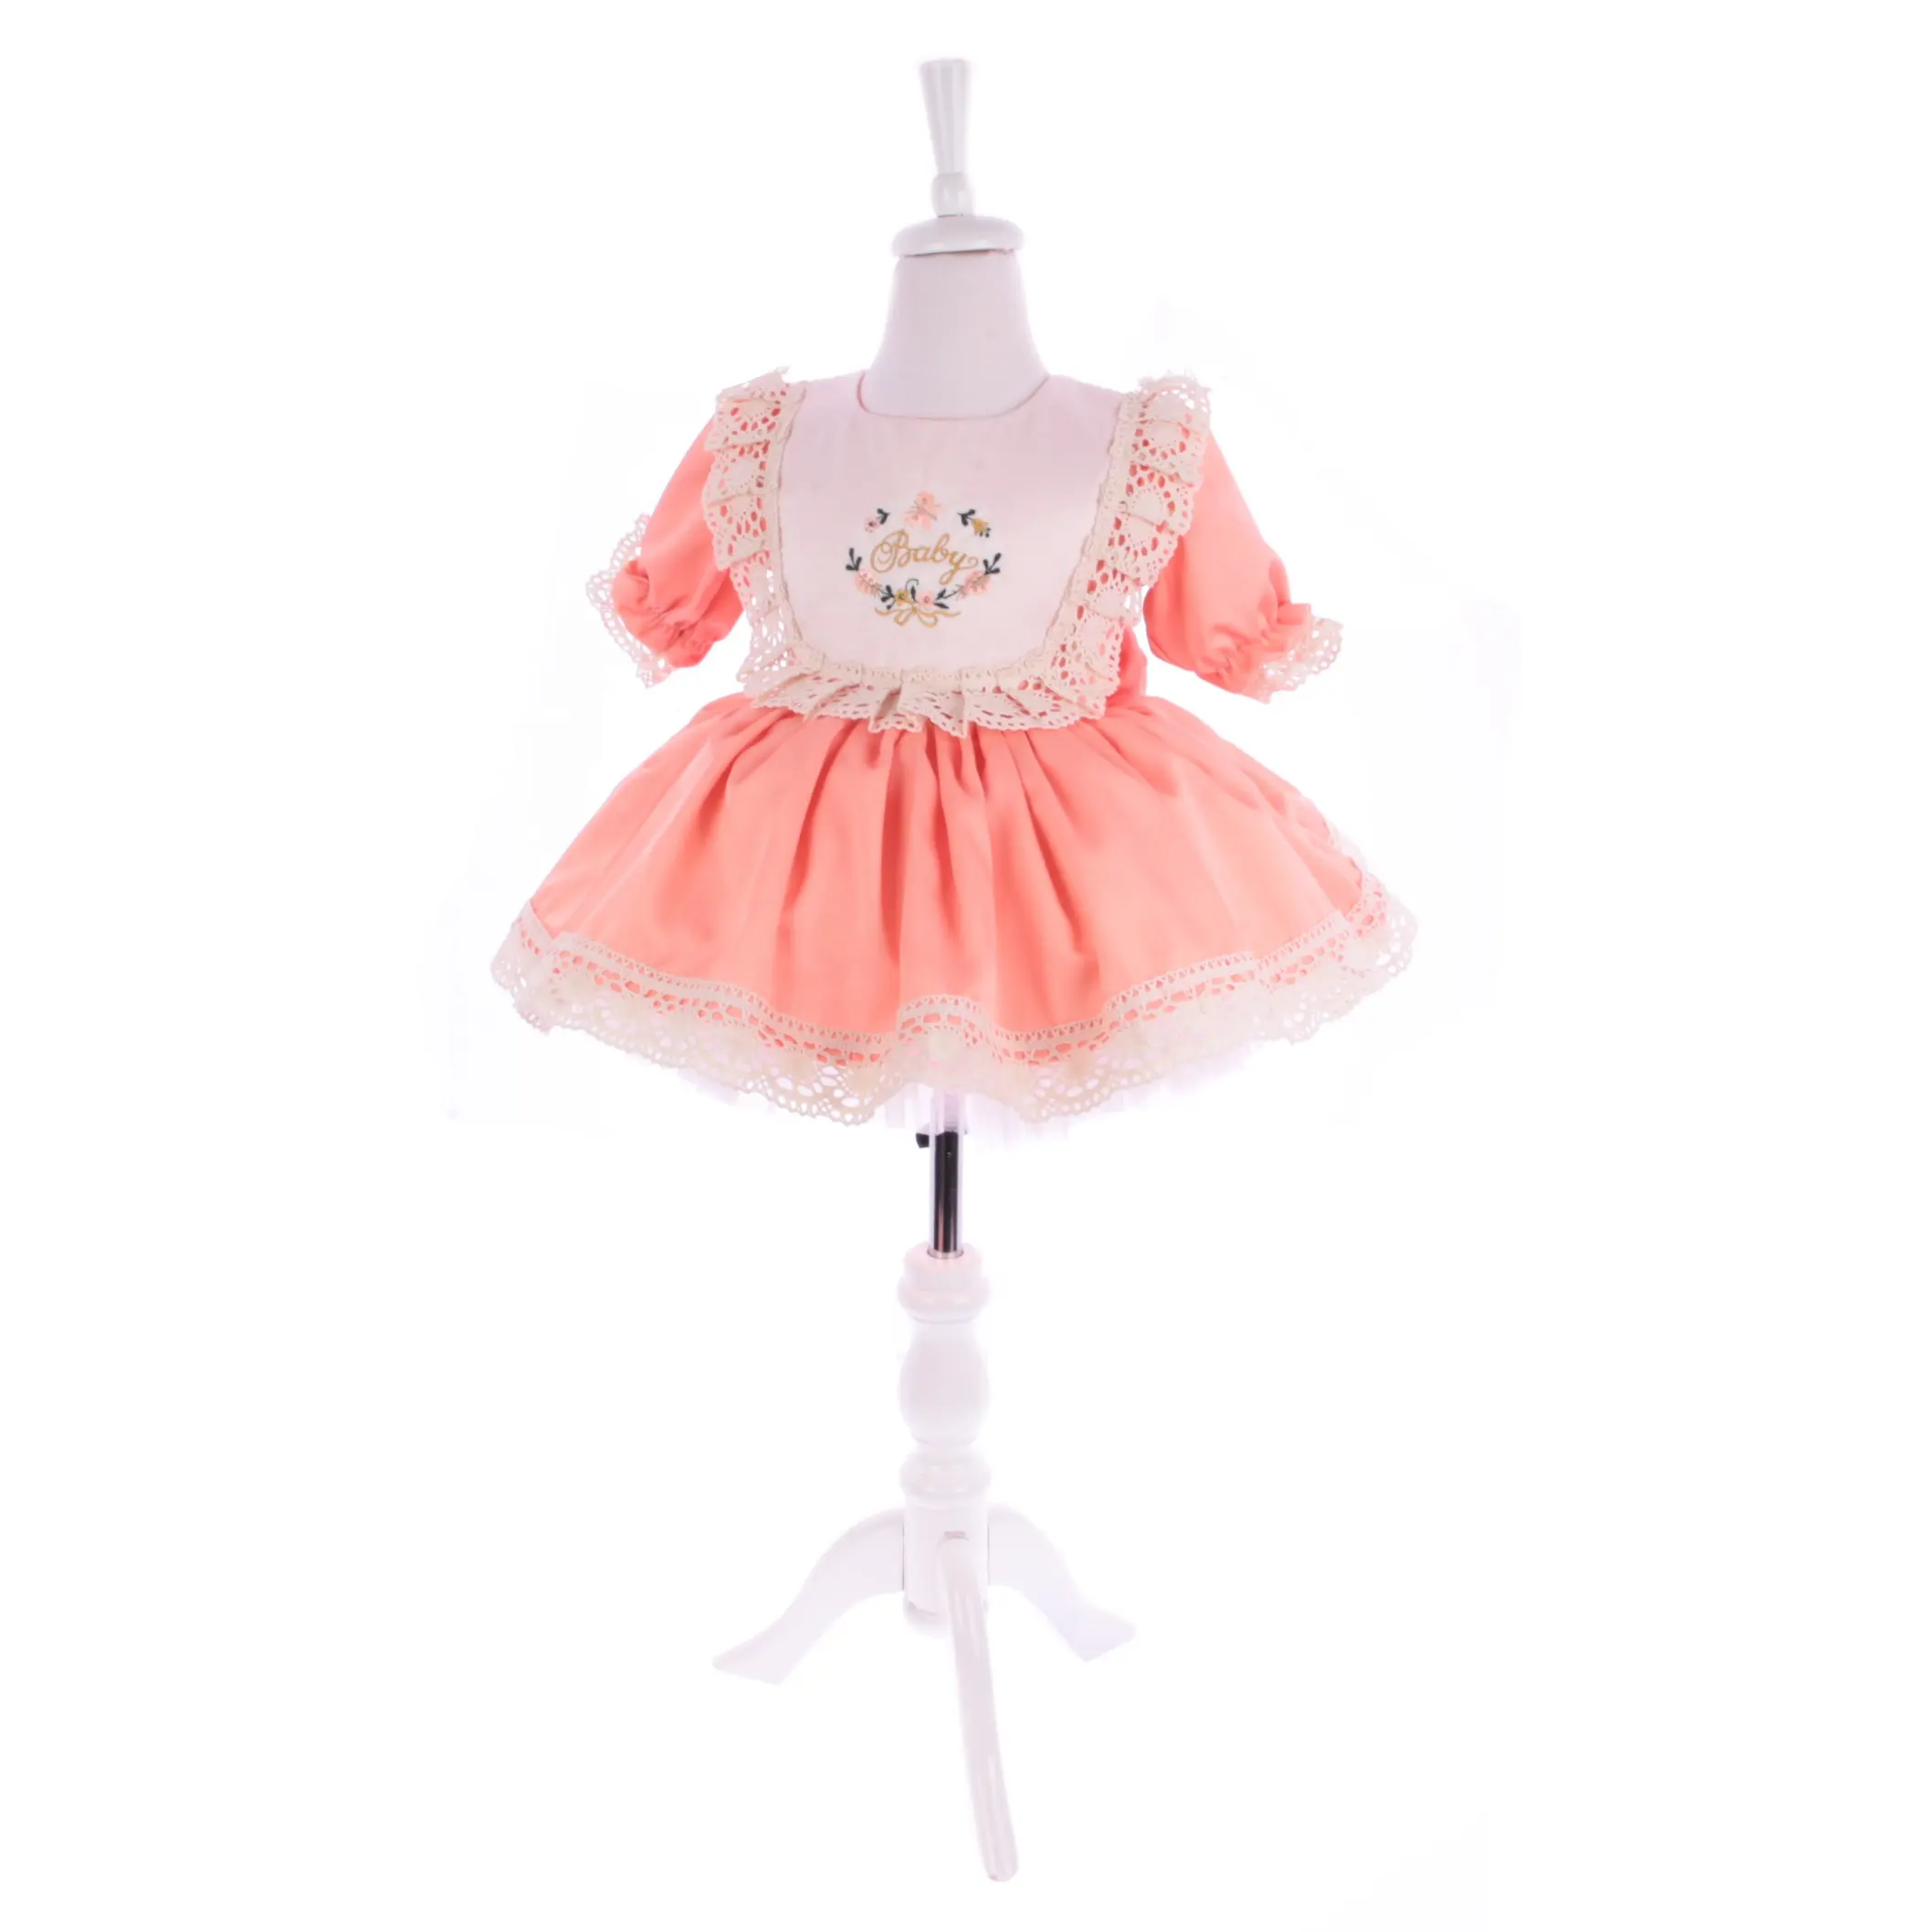 Wholesale Custom High Quality Modern Luxury Vintage Baby Girls Dresses Hair Band Shoes 1 Years Party Birthday Wedding Dress